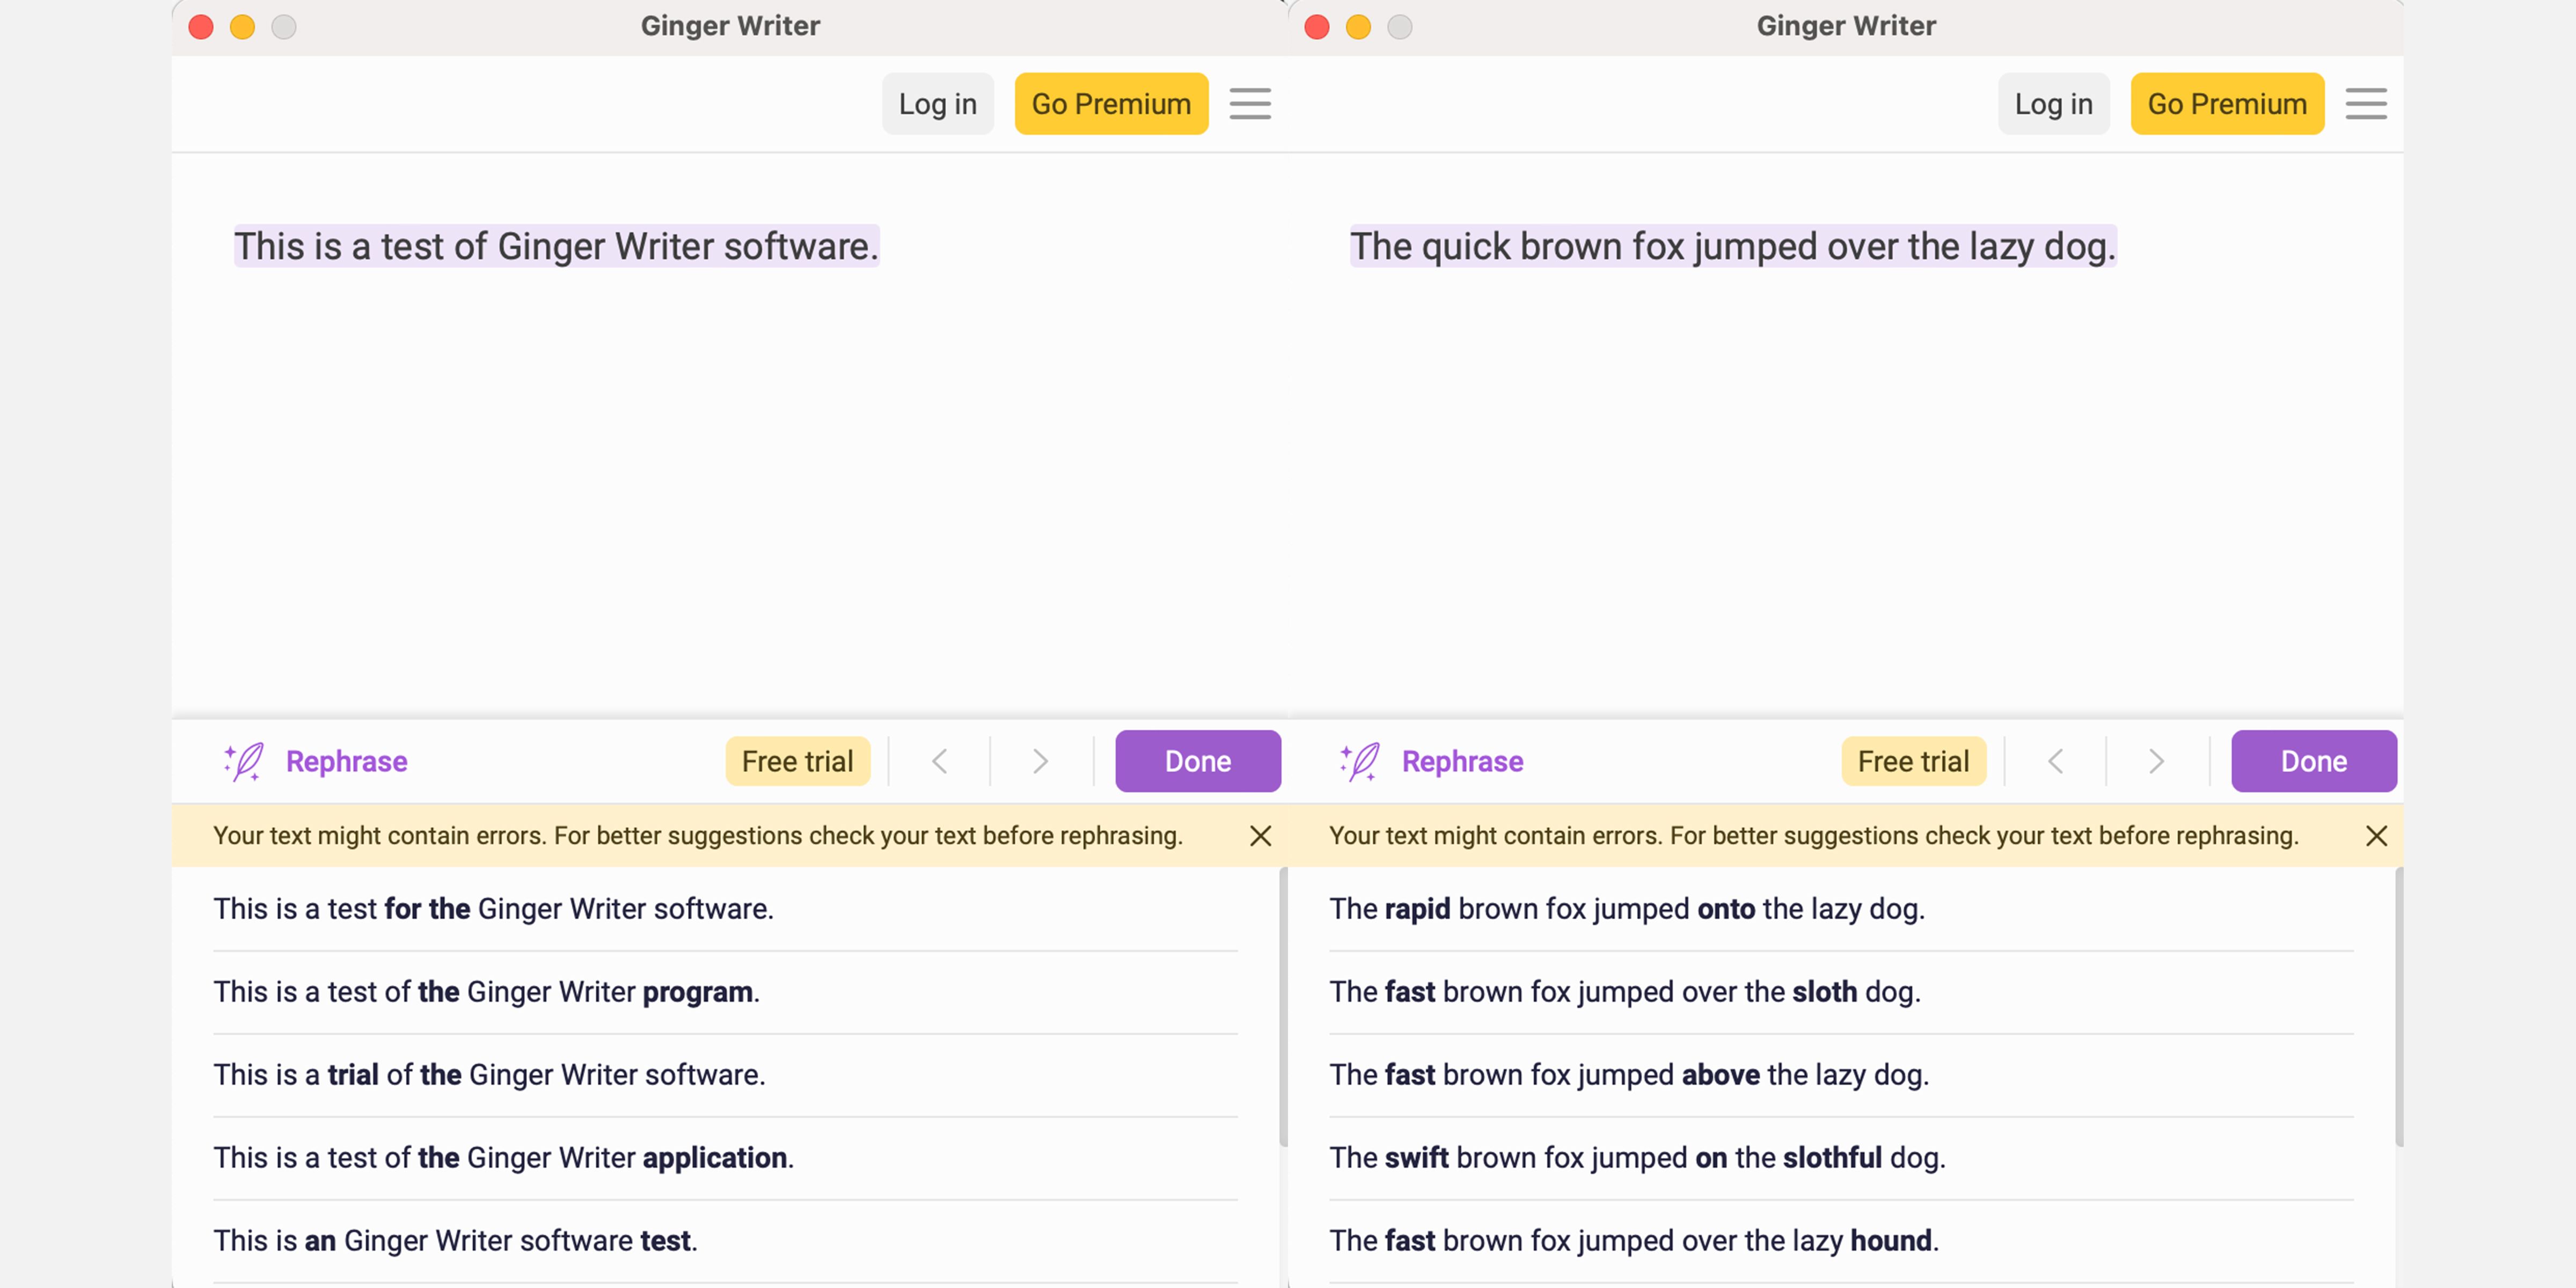 Screenshots of Ginger Writer software in use